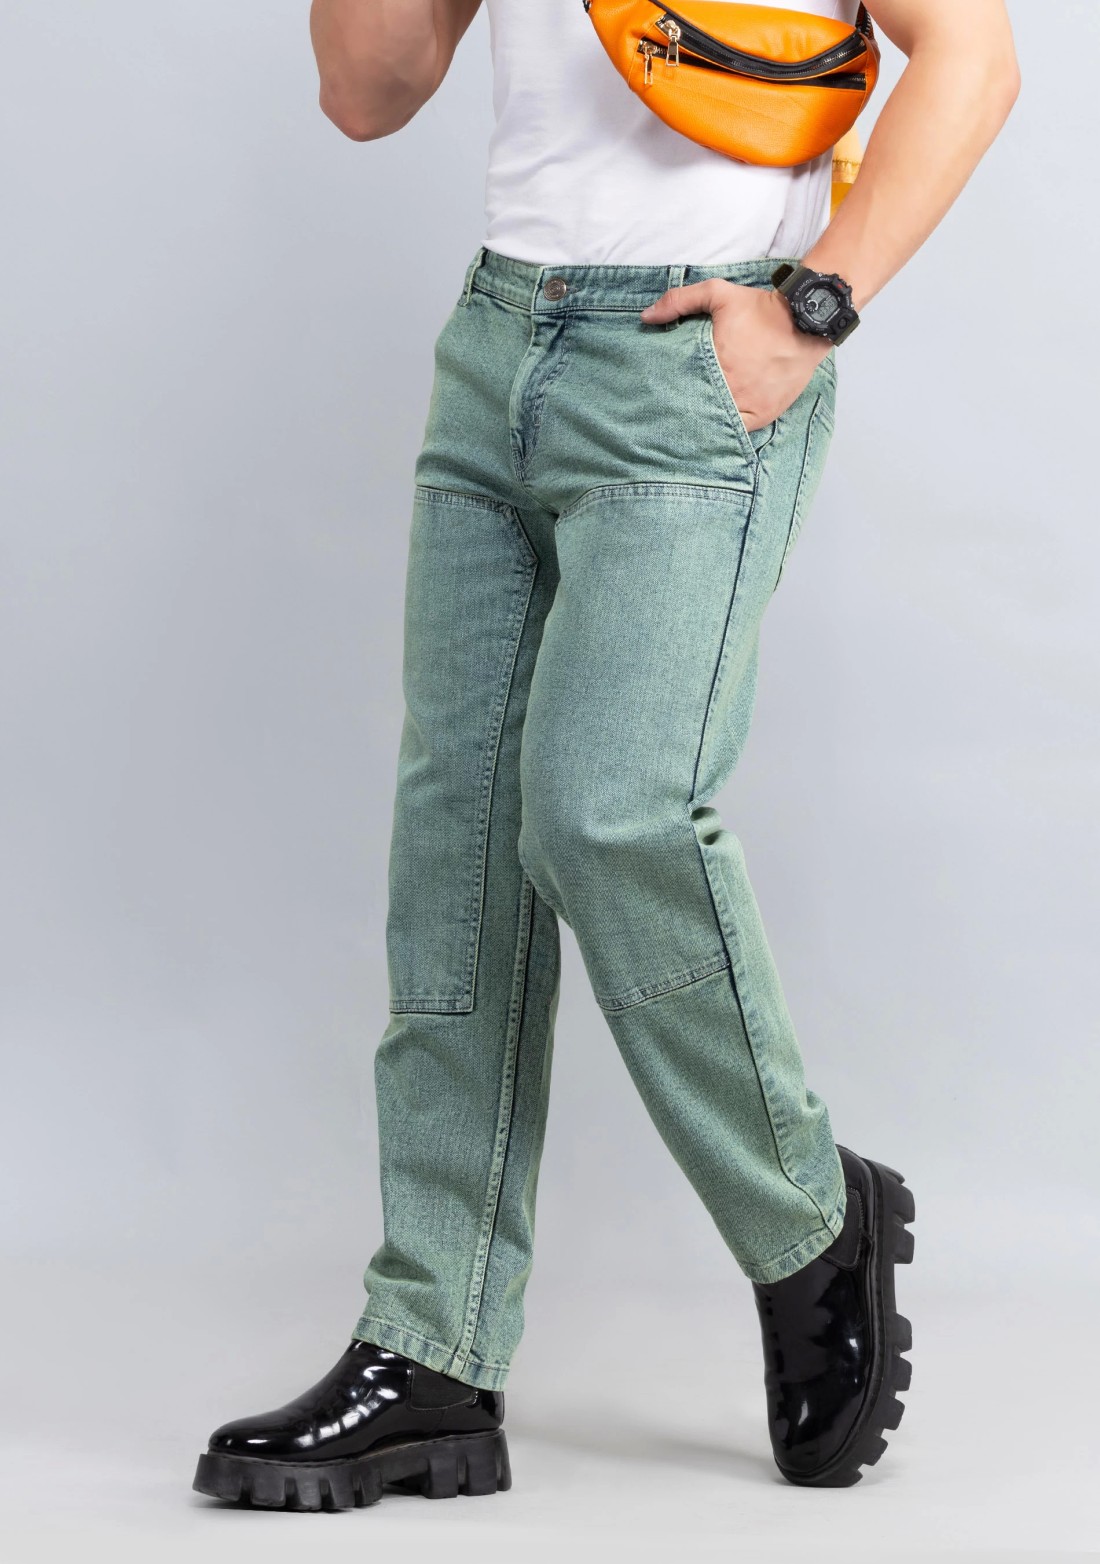 Share more than 112 light green jeans latest